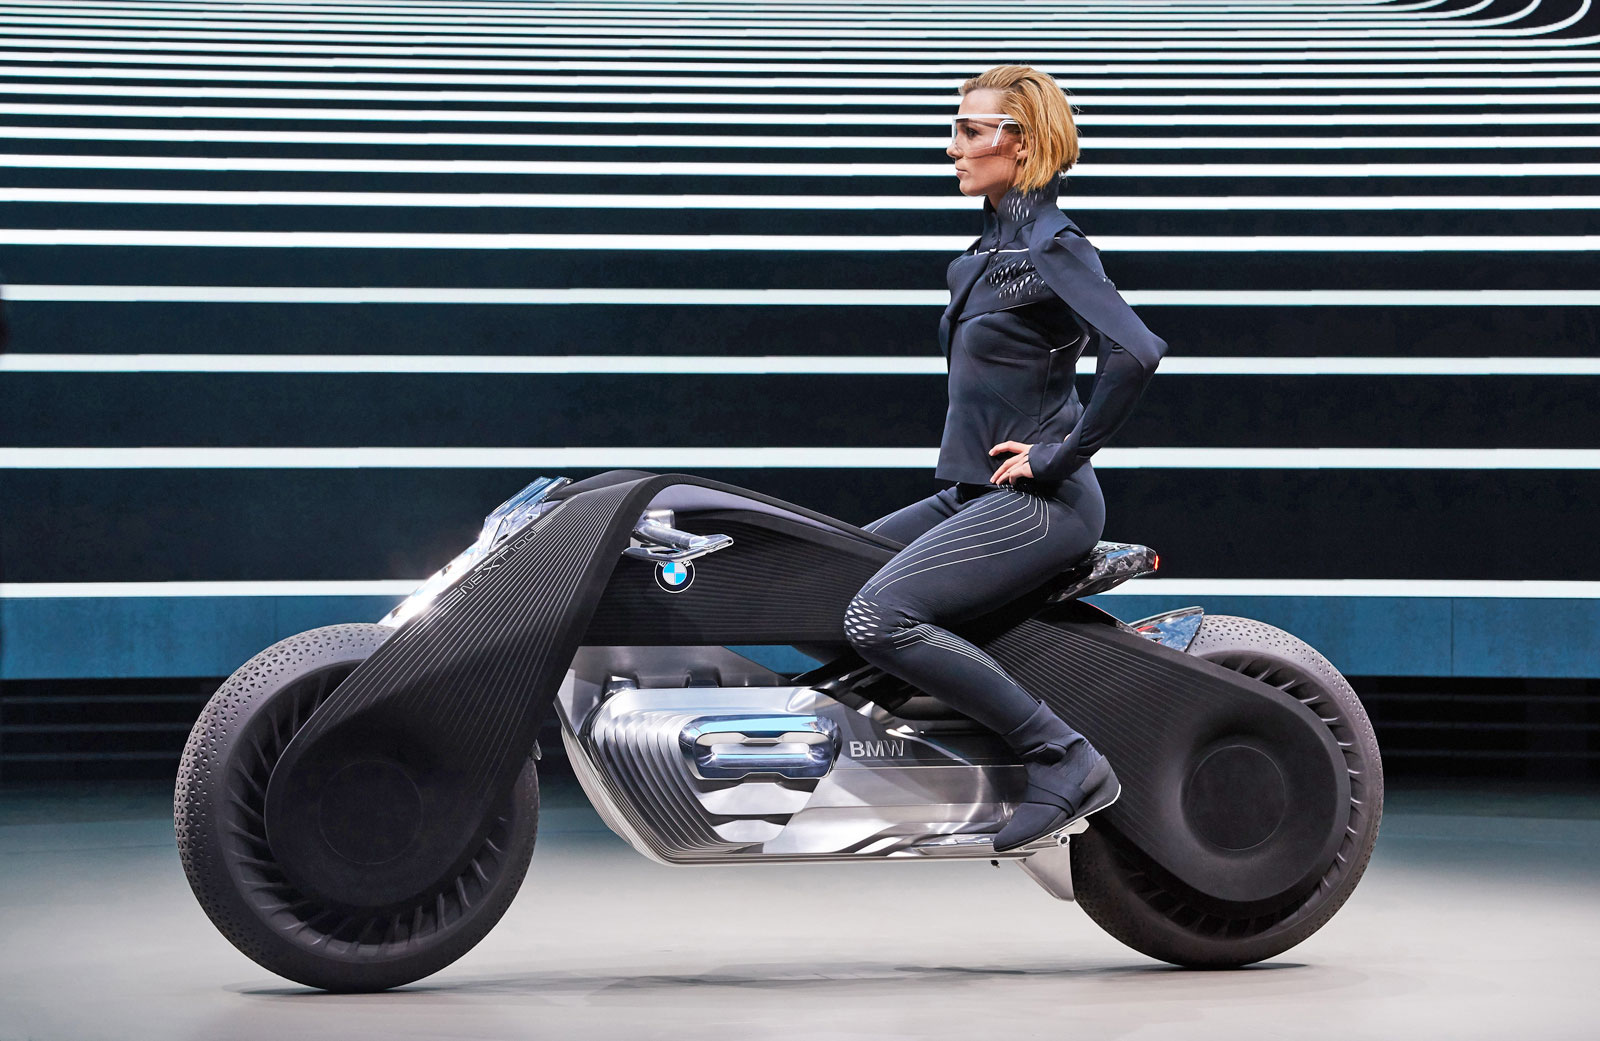 BMW shows off no-helmet concept motorcycle | Inquirer Technology